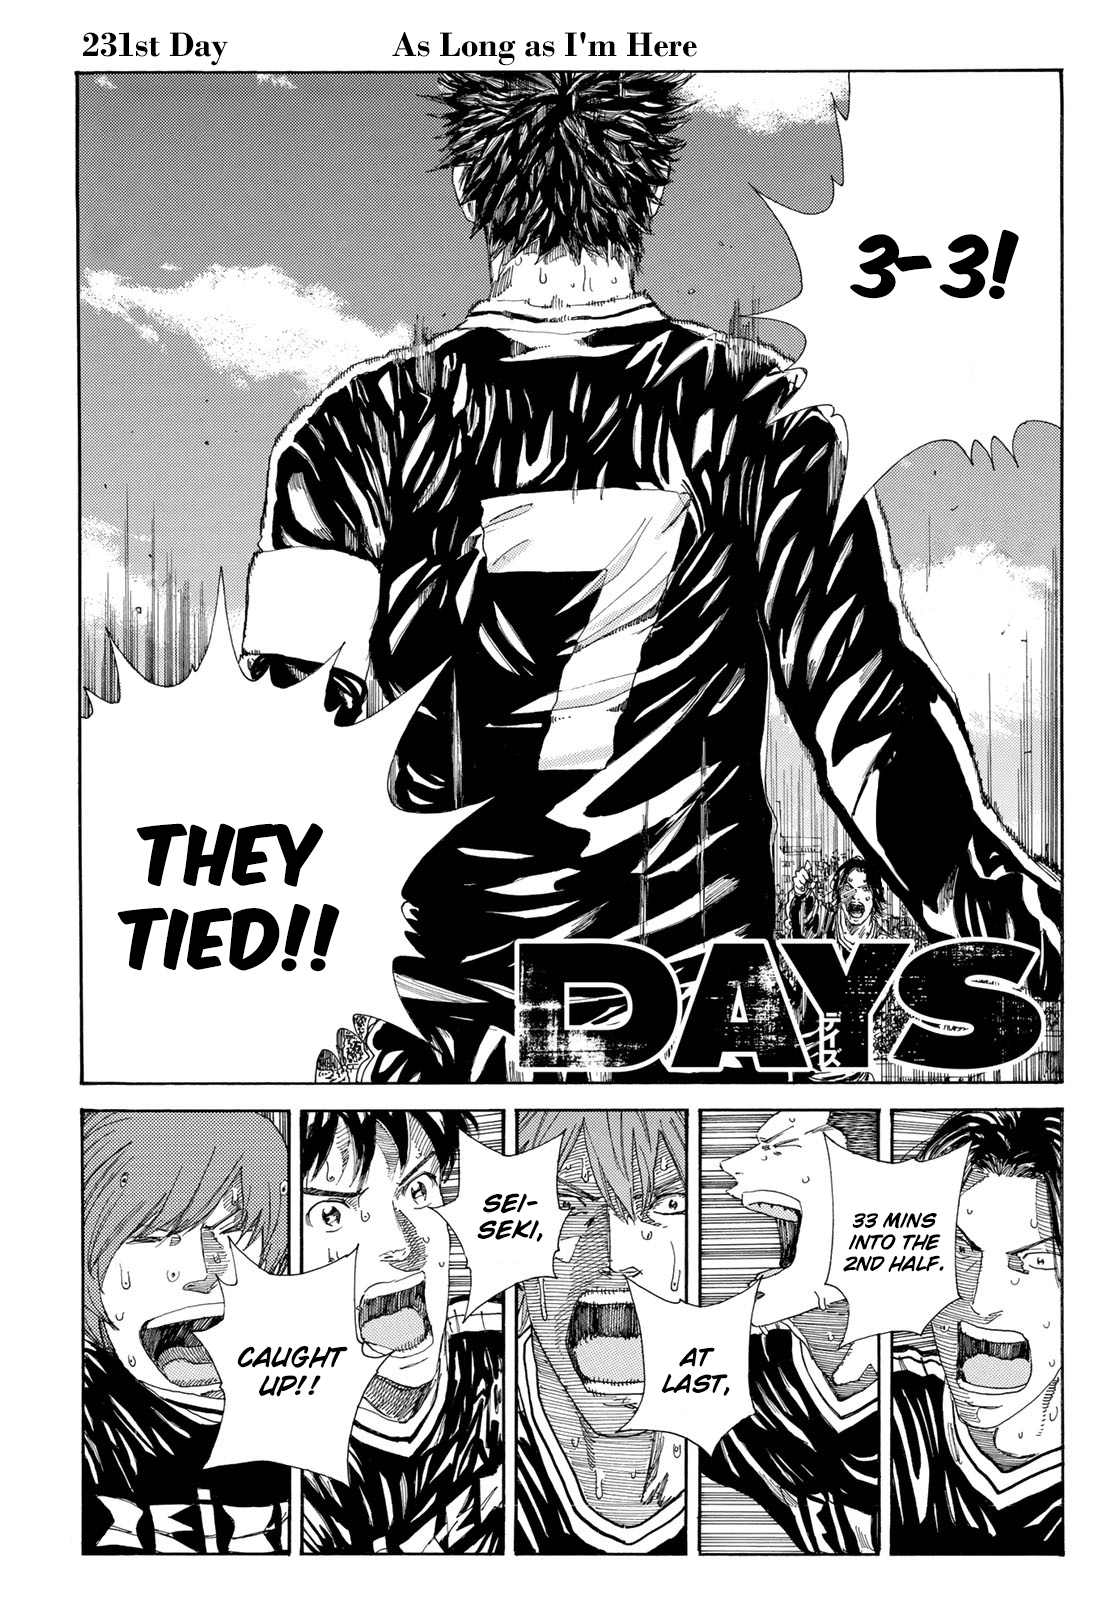 Days Vol. 26 Ch. 231 As Long As I'm Here